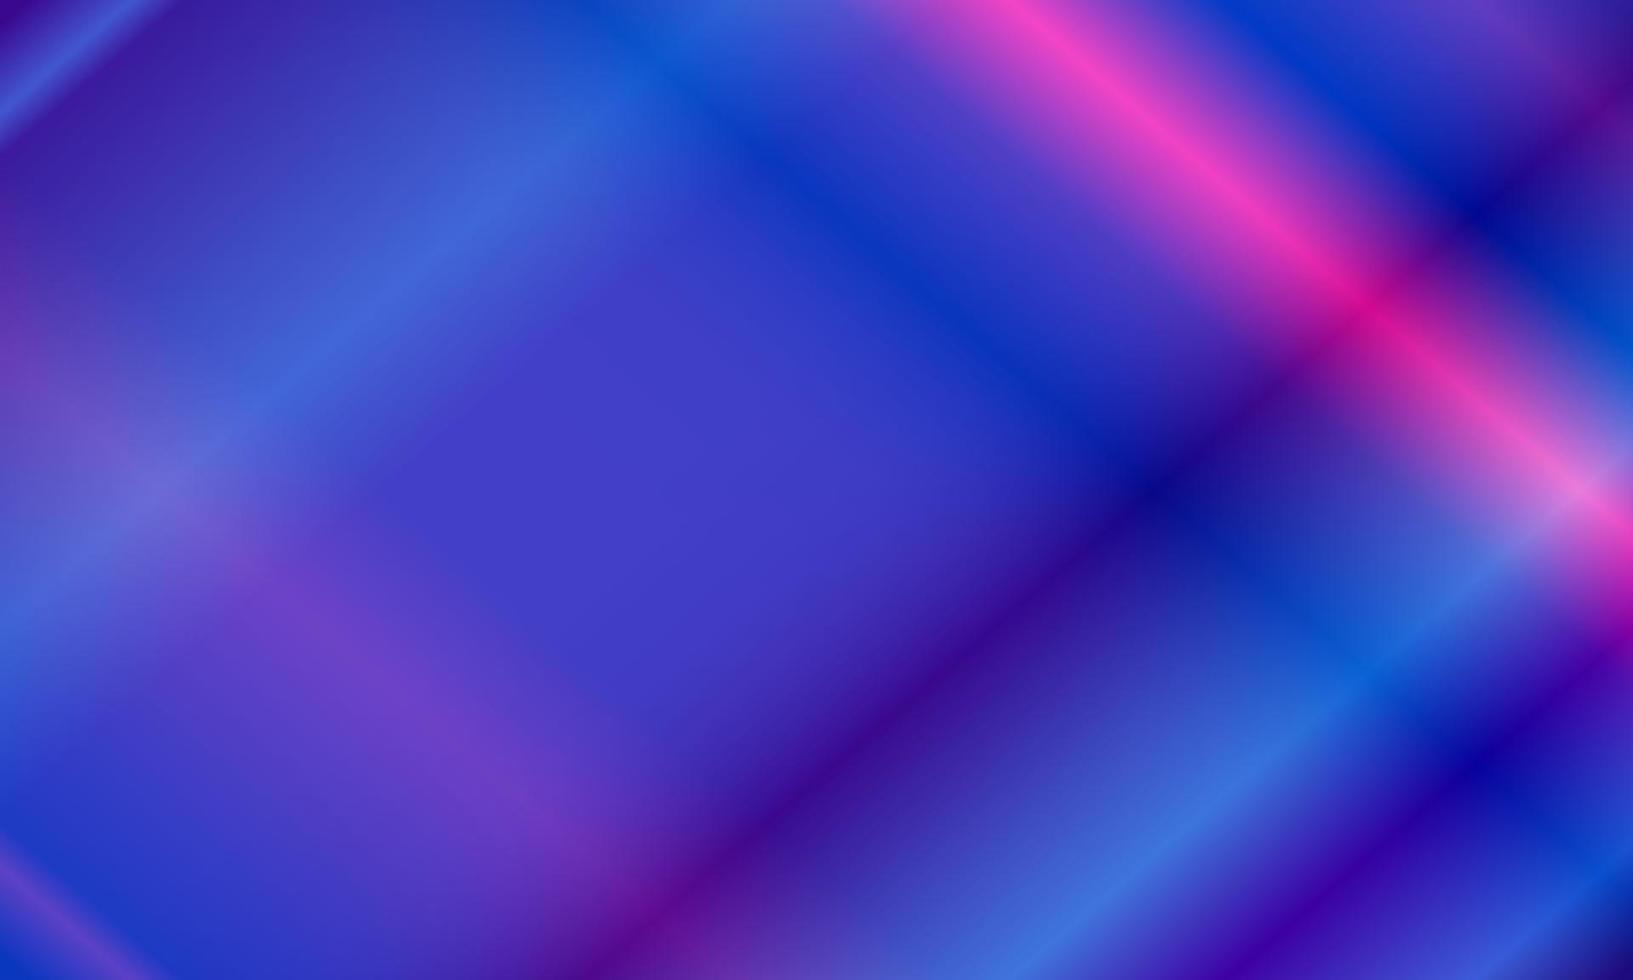 Pastel blue, purple and pink abstract background with neon light pattern. glossy, gradient, blur, modern and colorful style. great for background, backdrop, wallpaper, cover, poster, banner or flyer vector